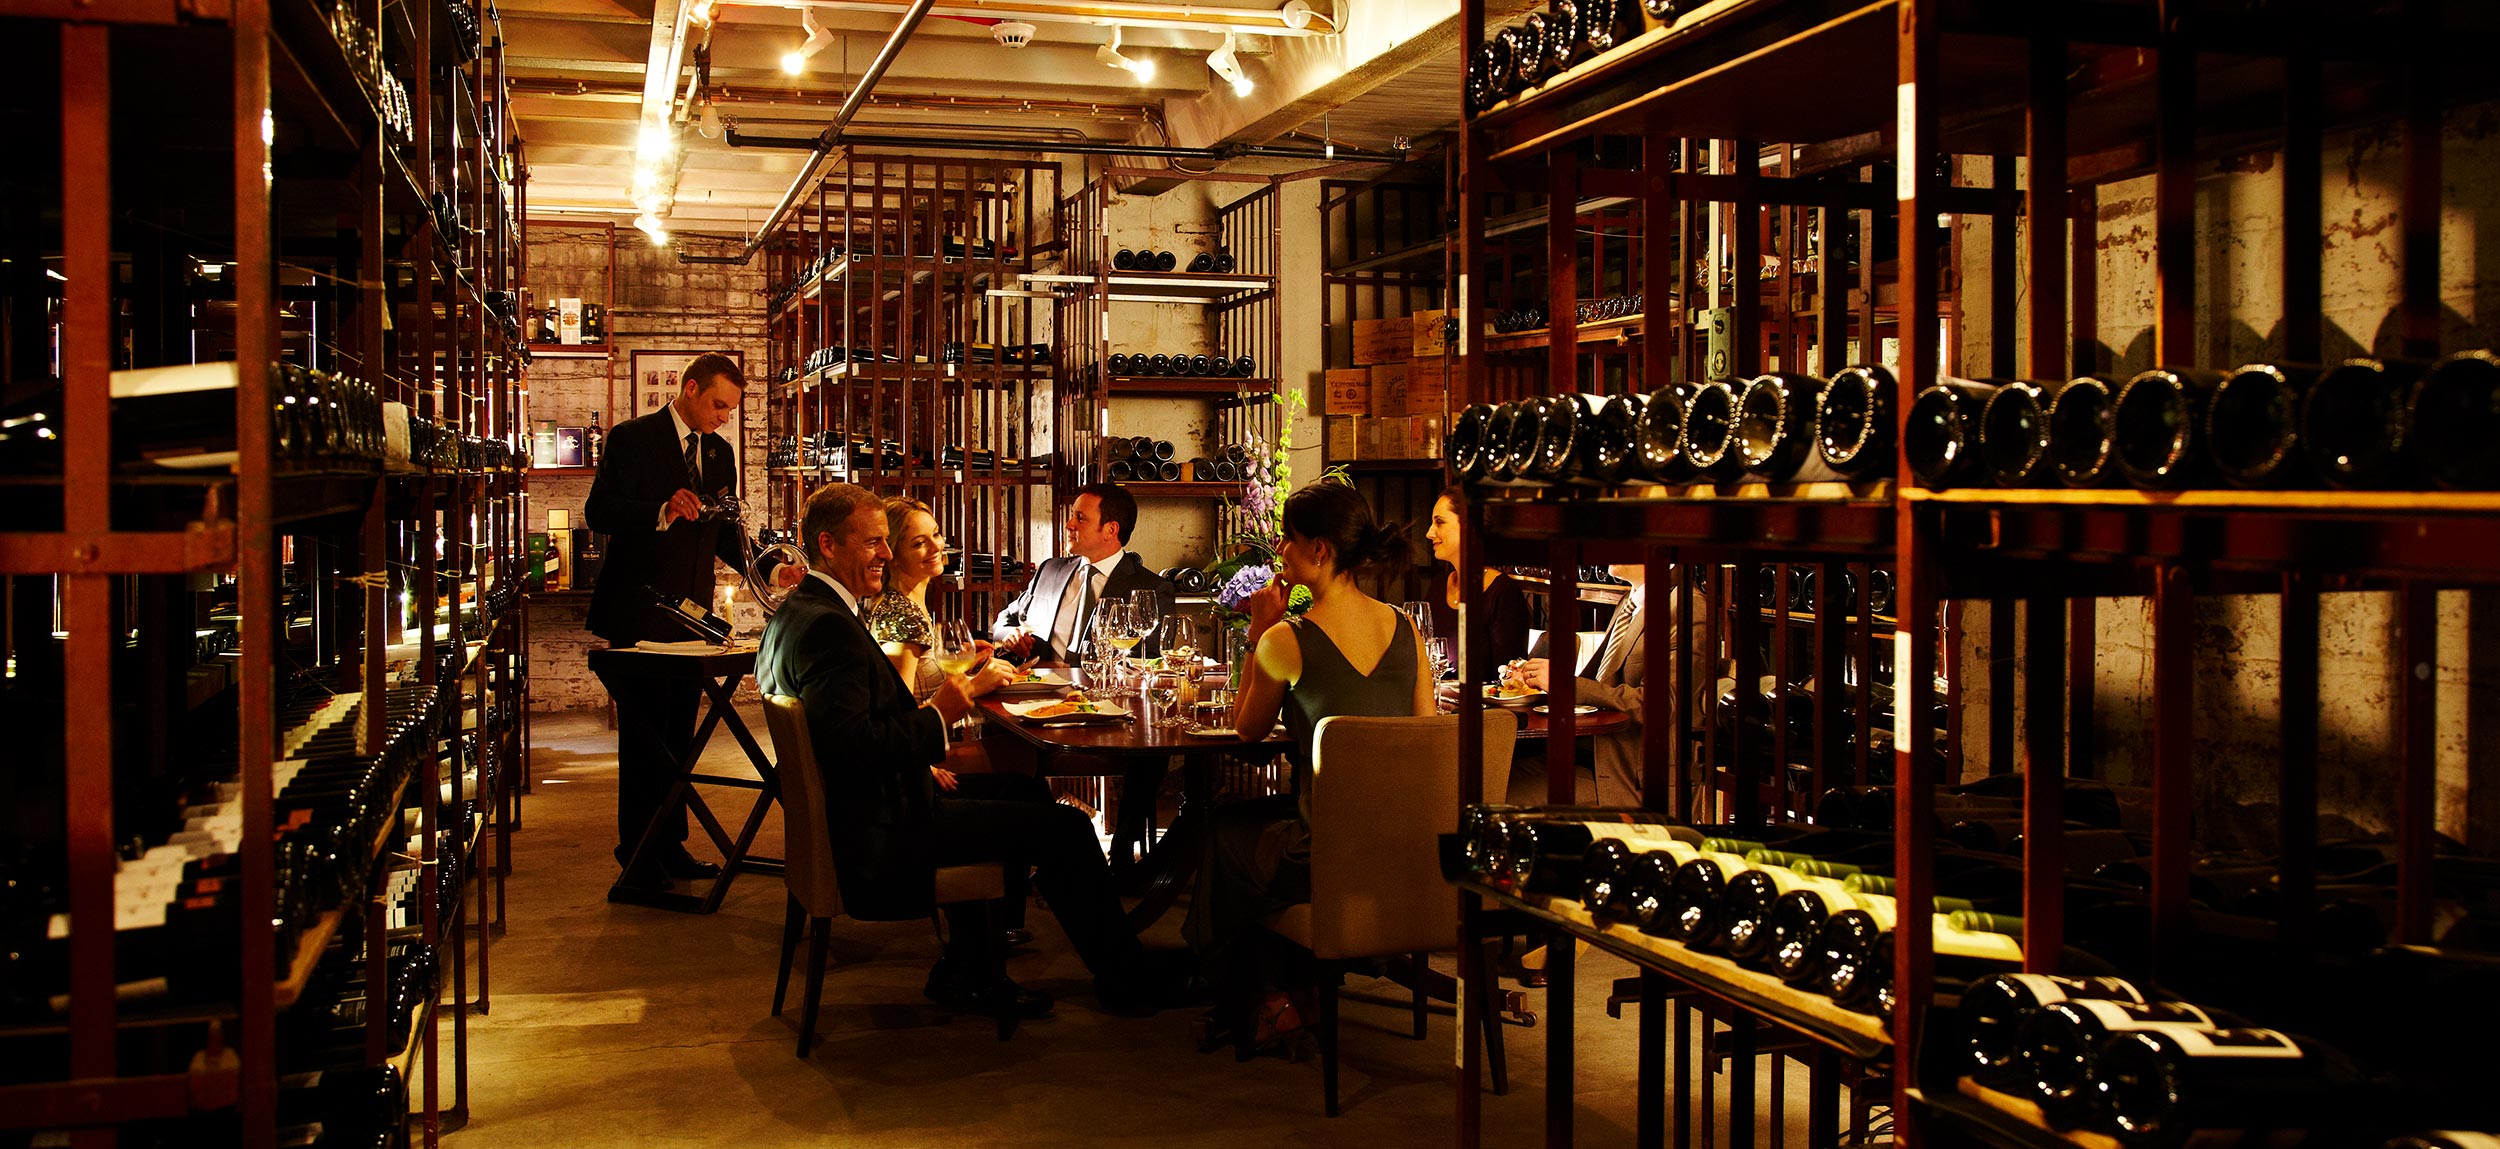 Dinner in the wine cellars, Gleneagles, Scotland.  Inetrior photography by Mike Caldwell